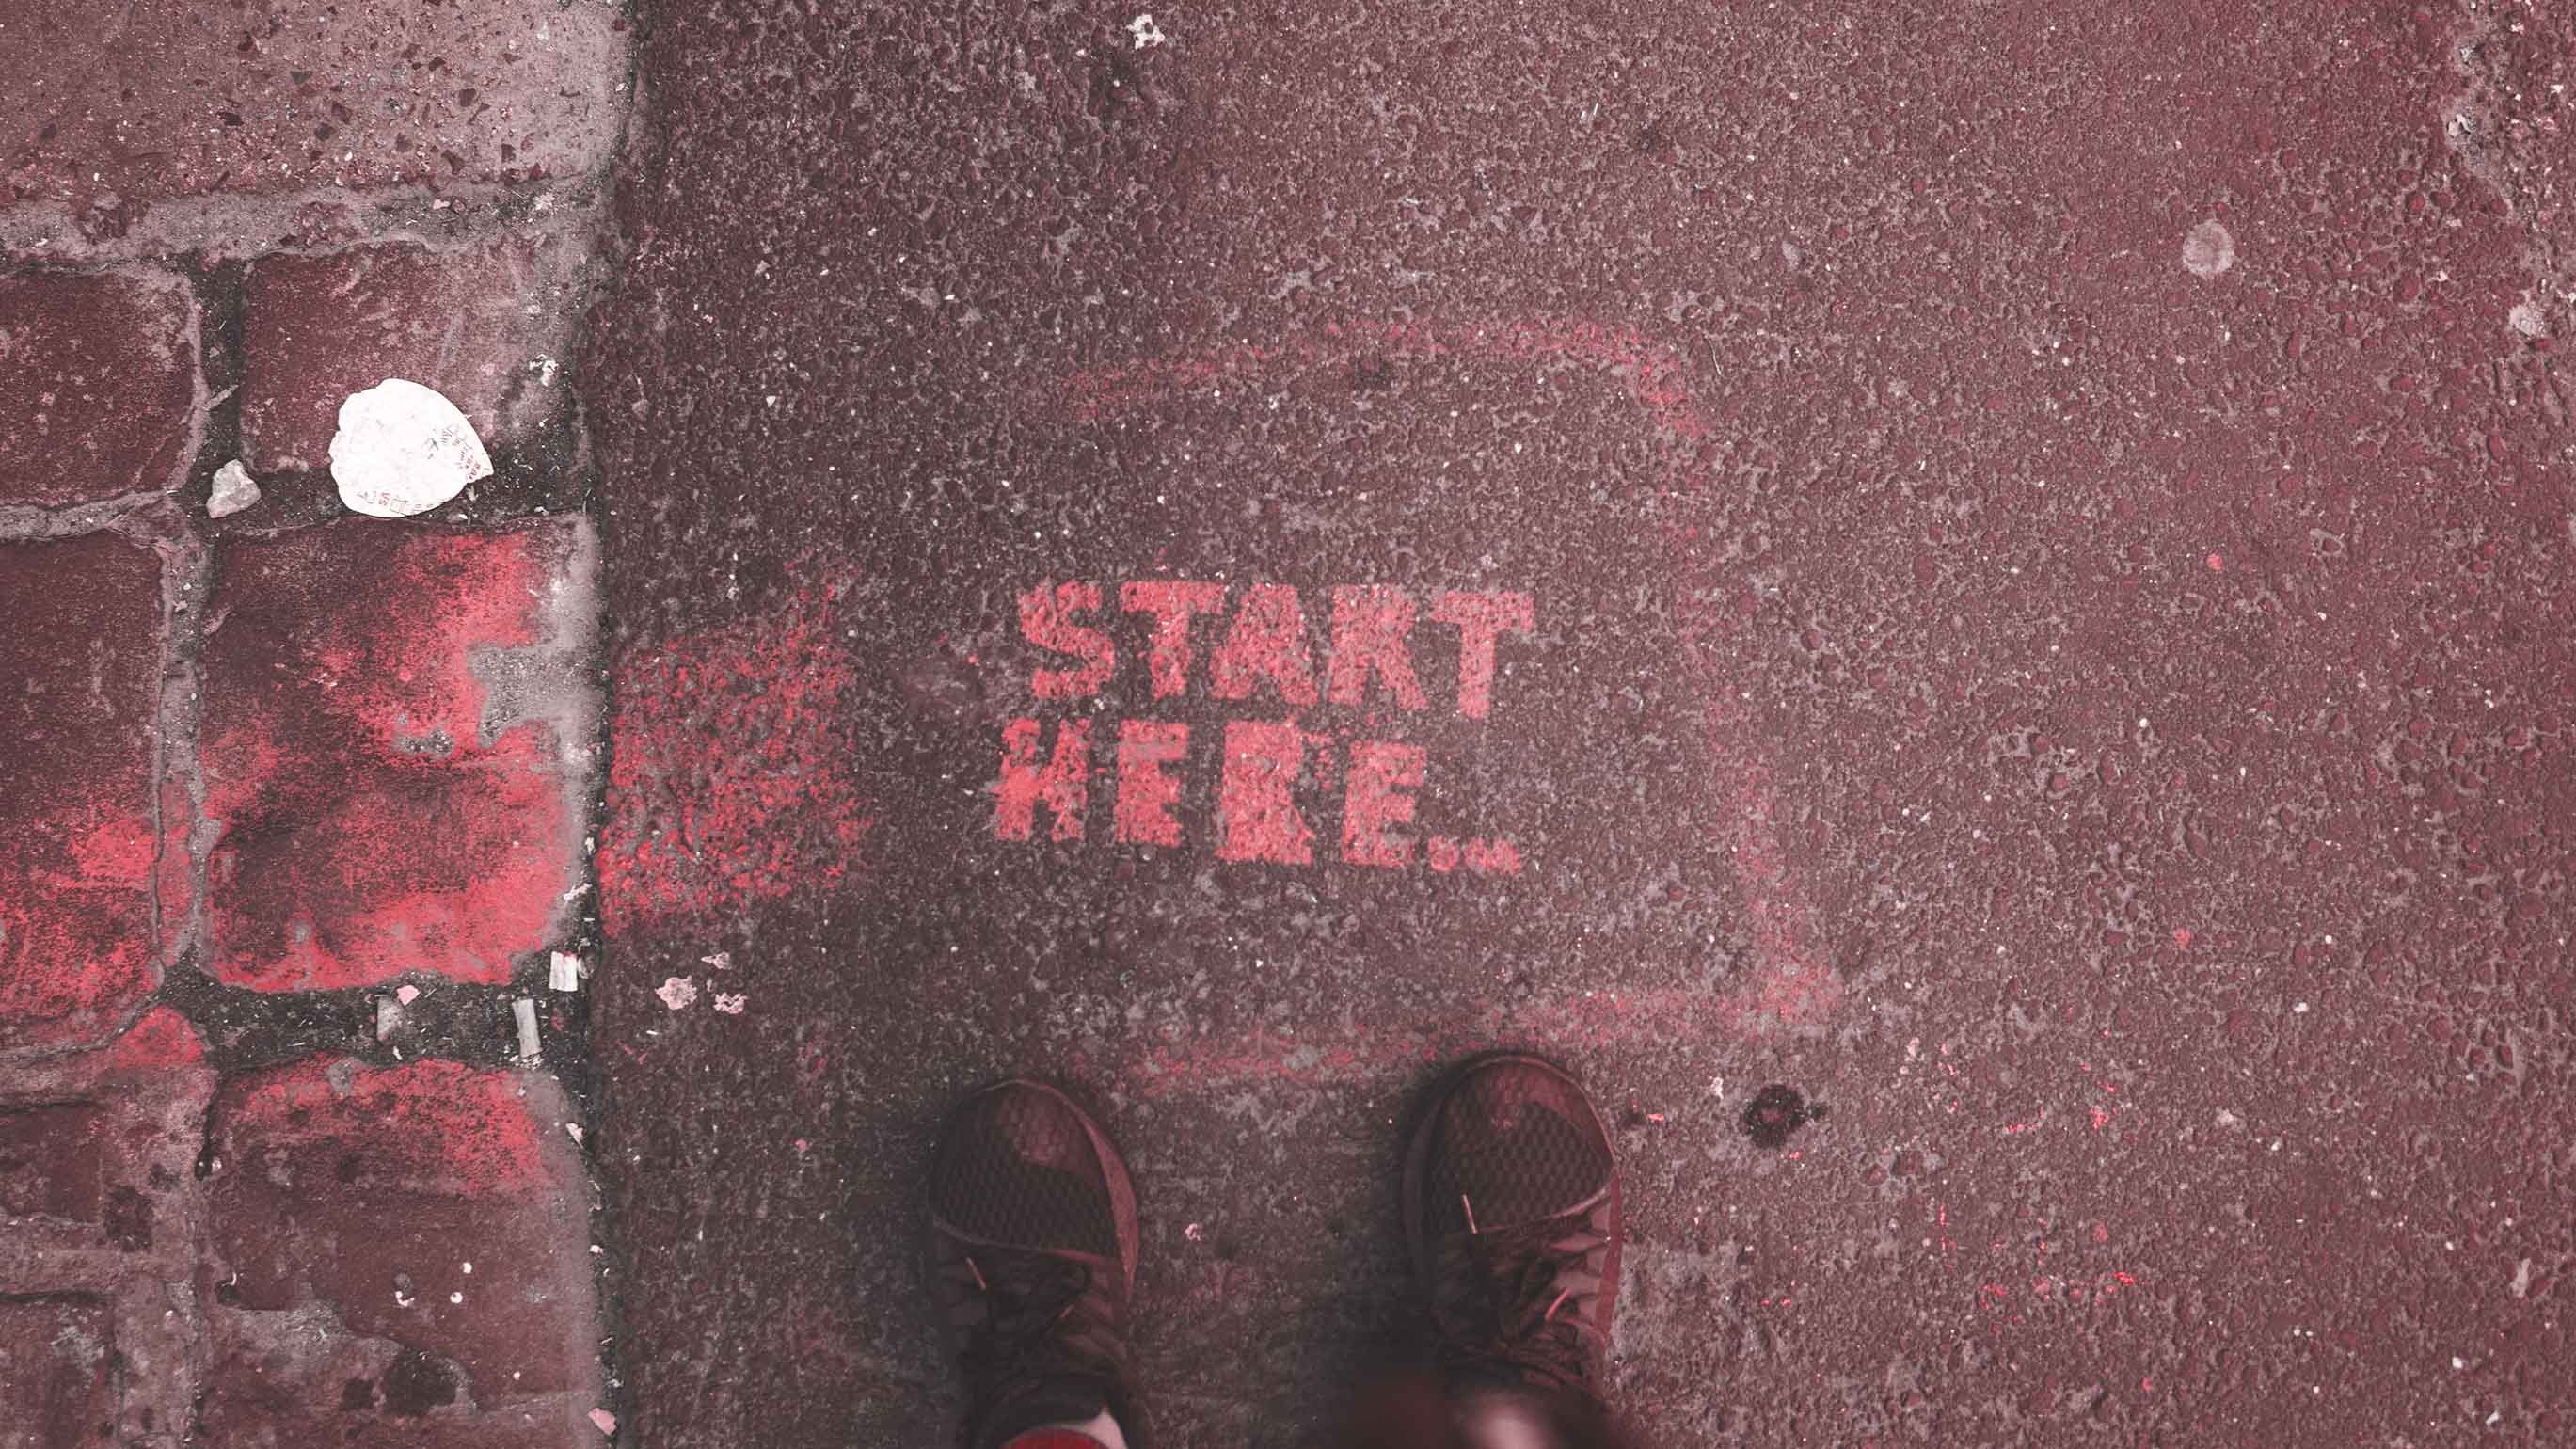 Paint on street that says "Start Here"